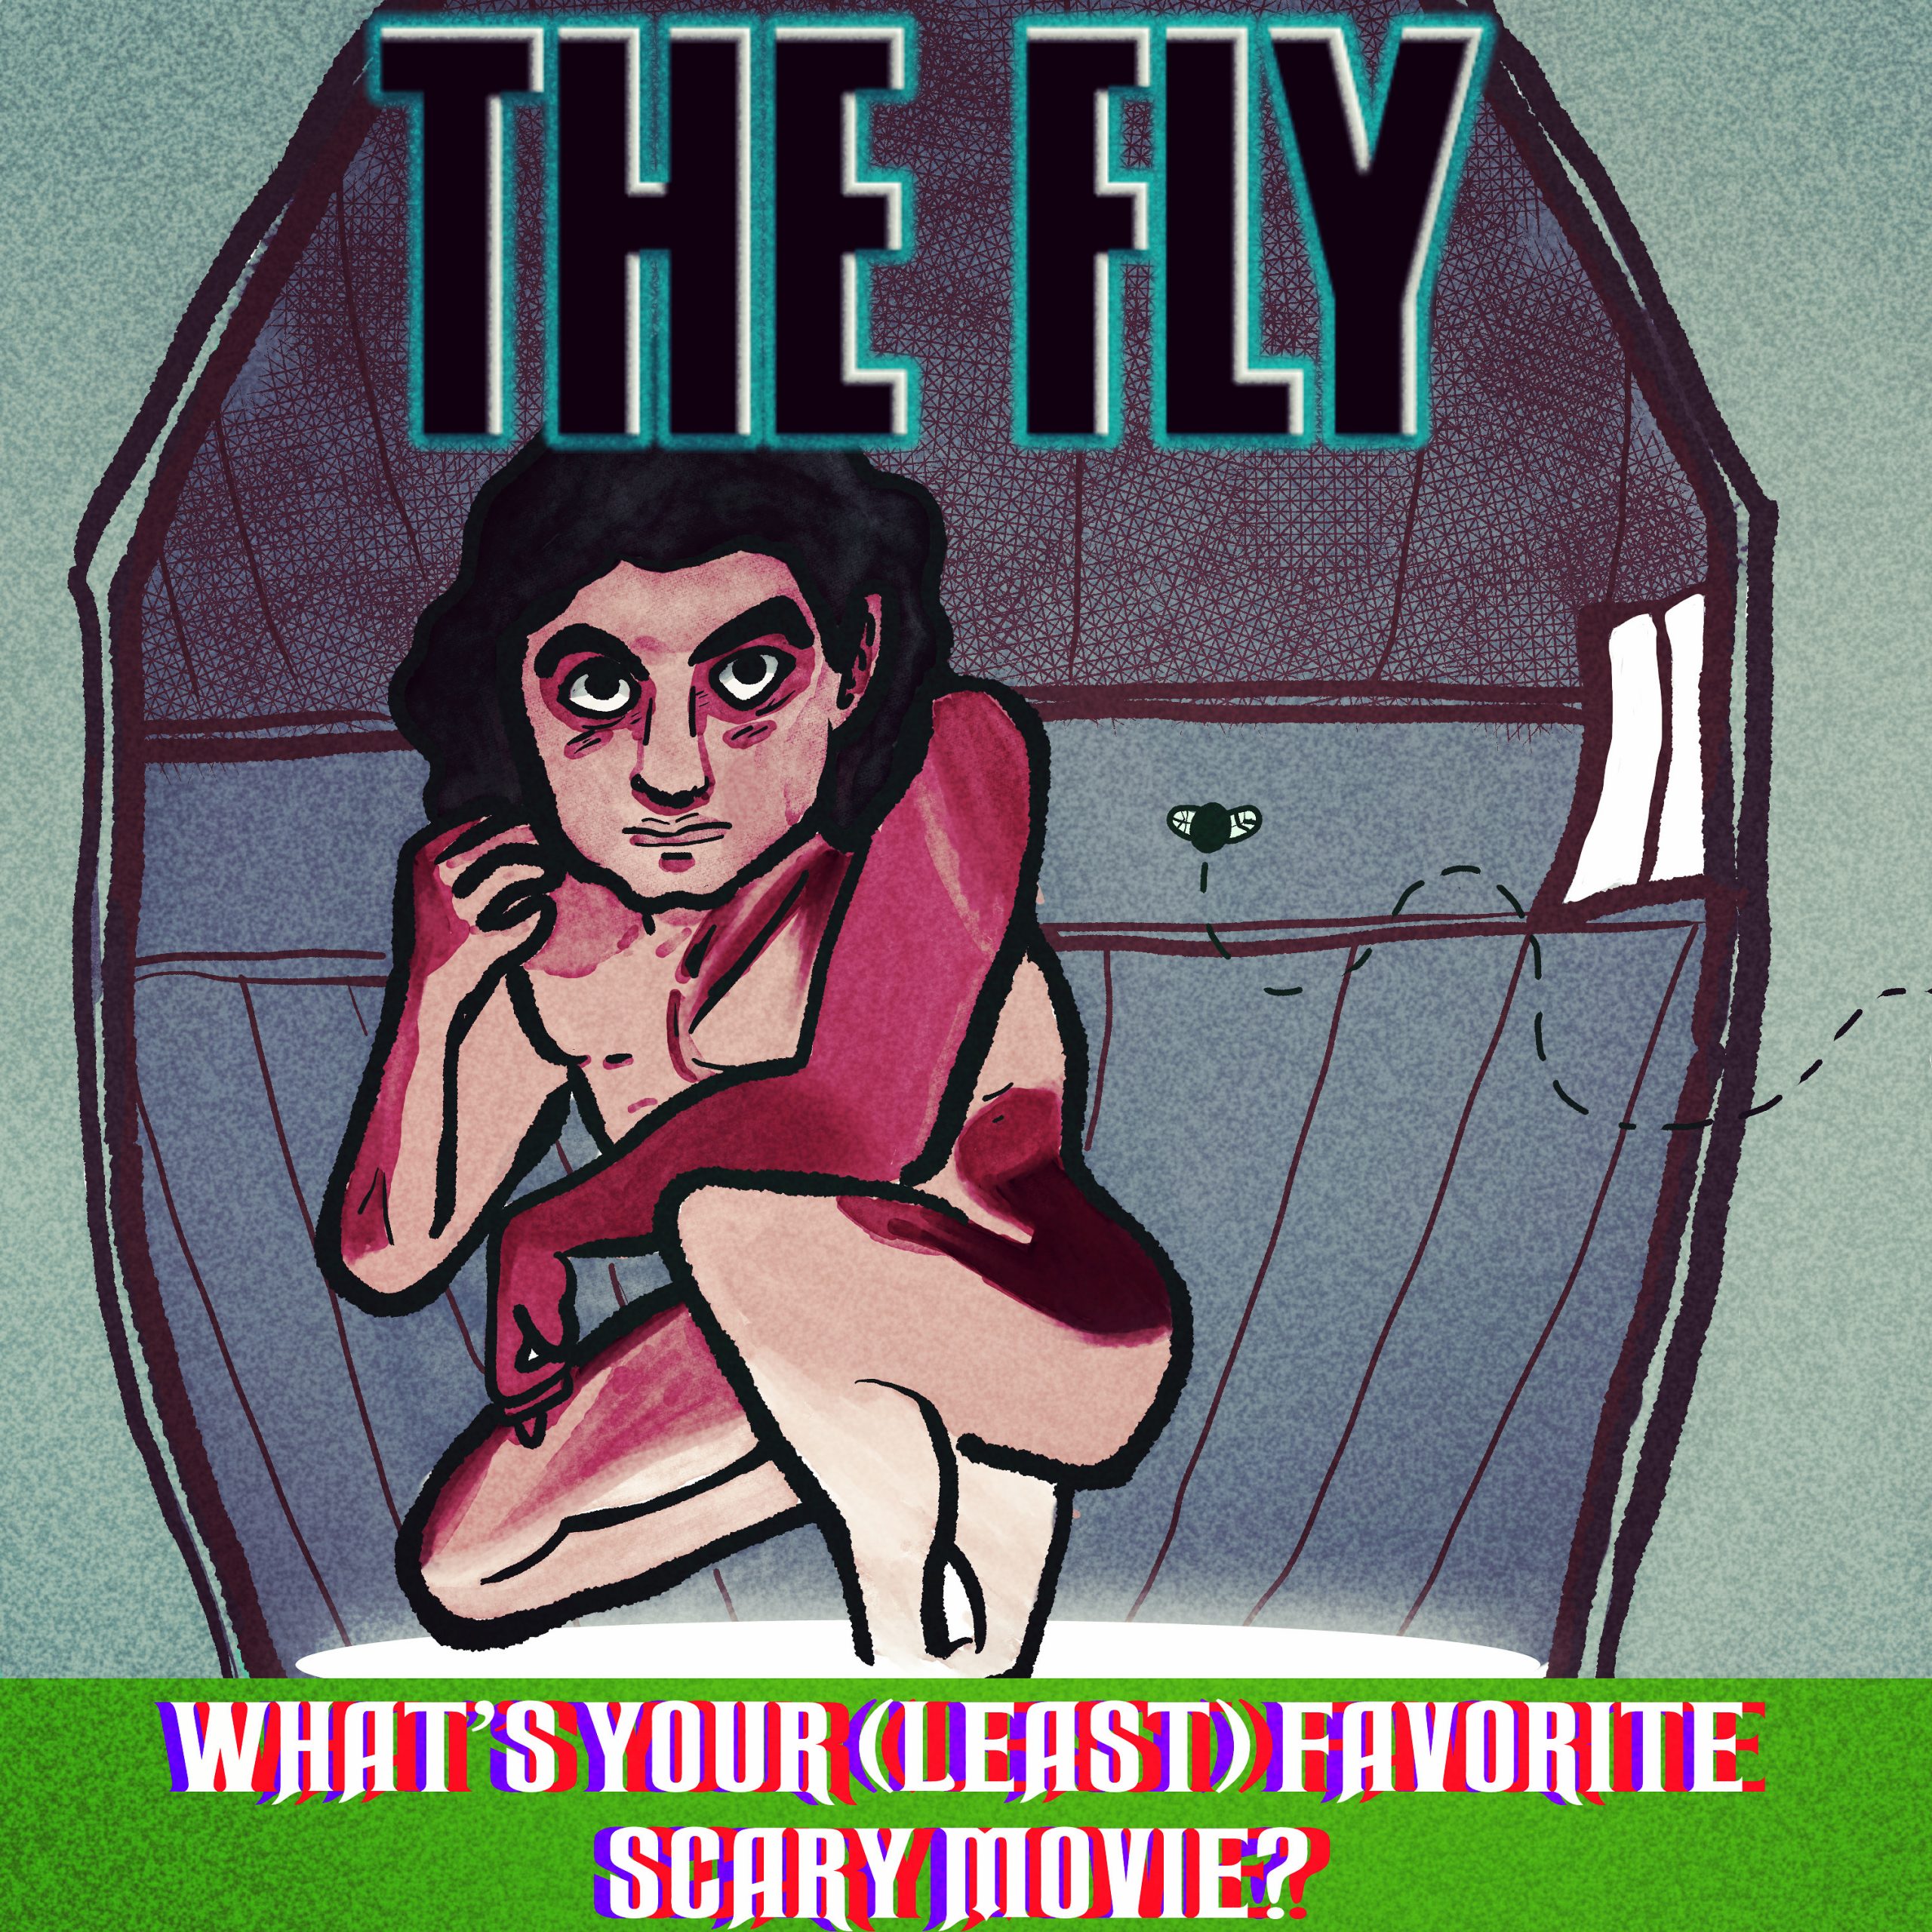 #105: The Fly (1986)